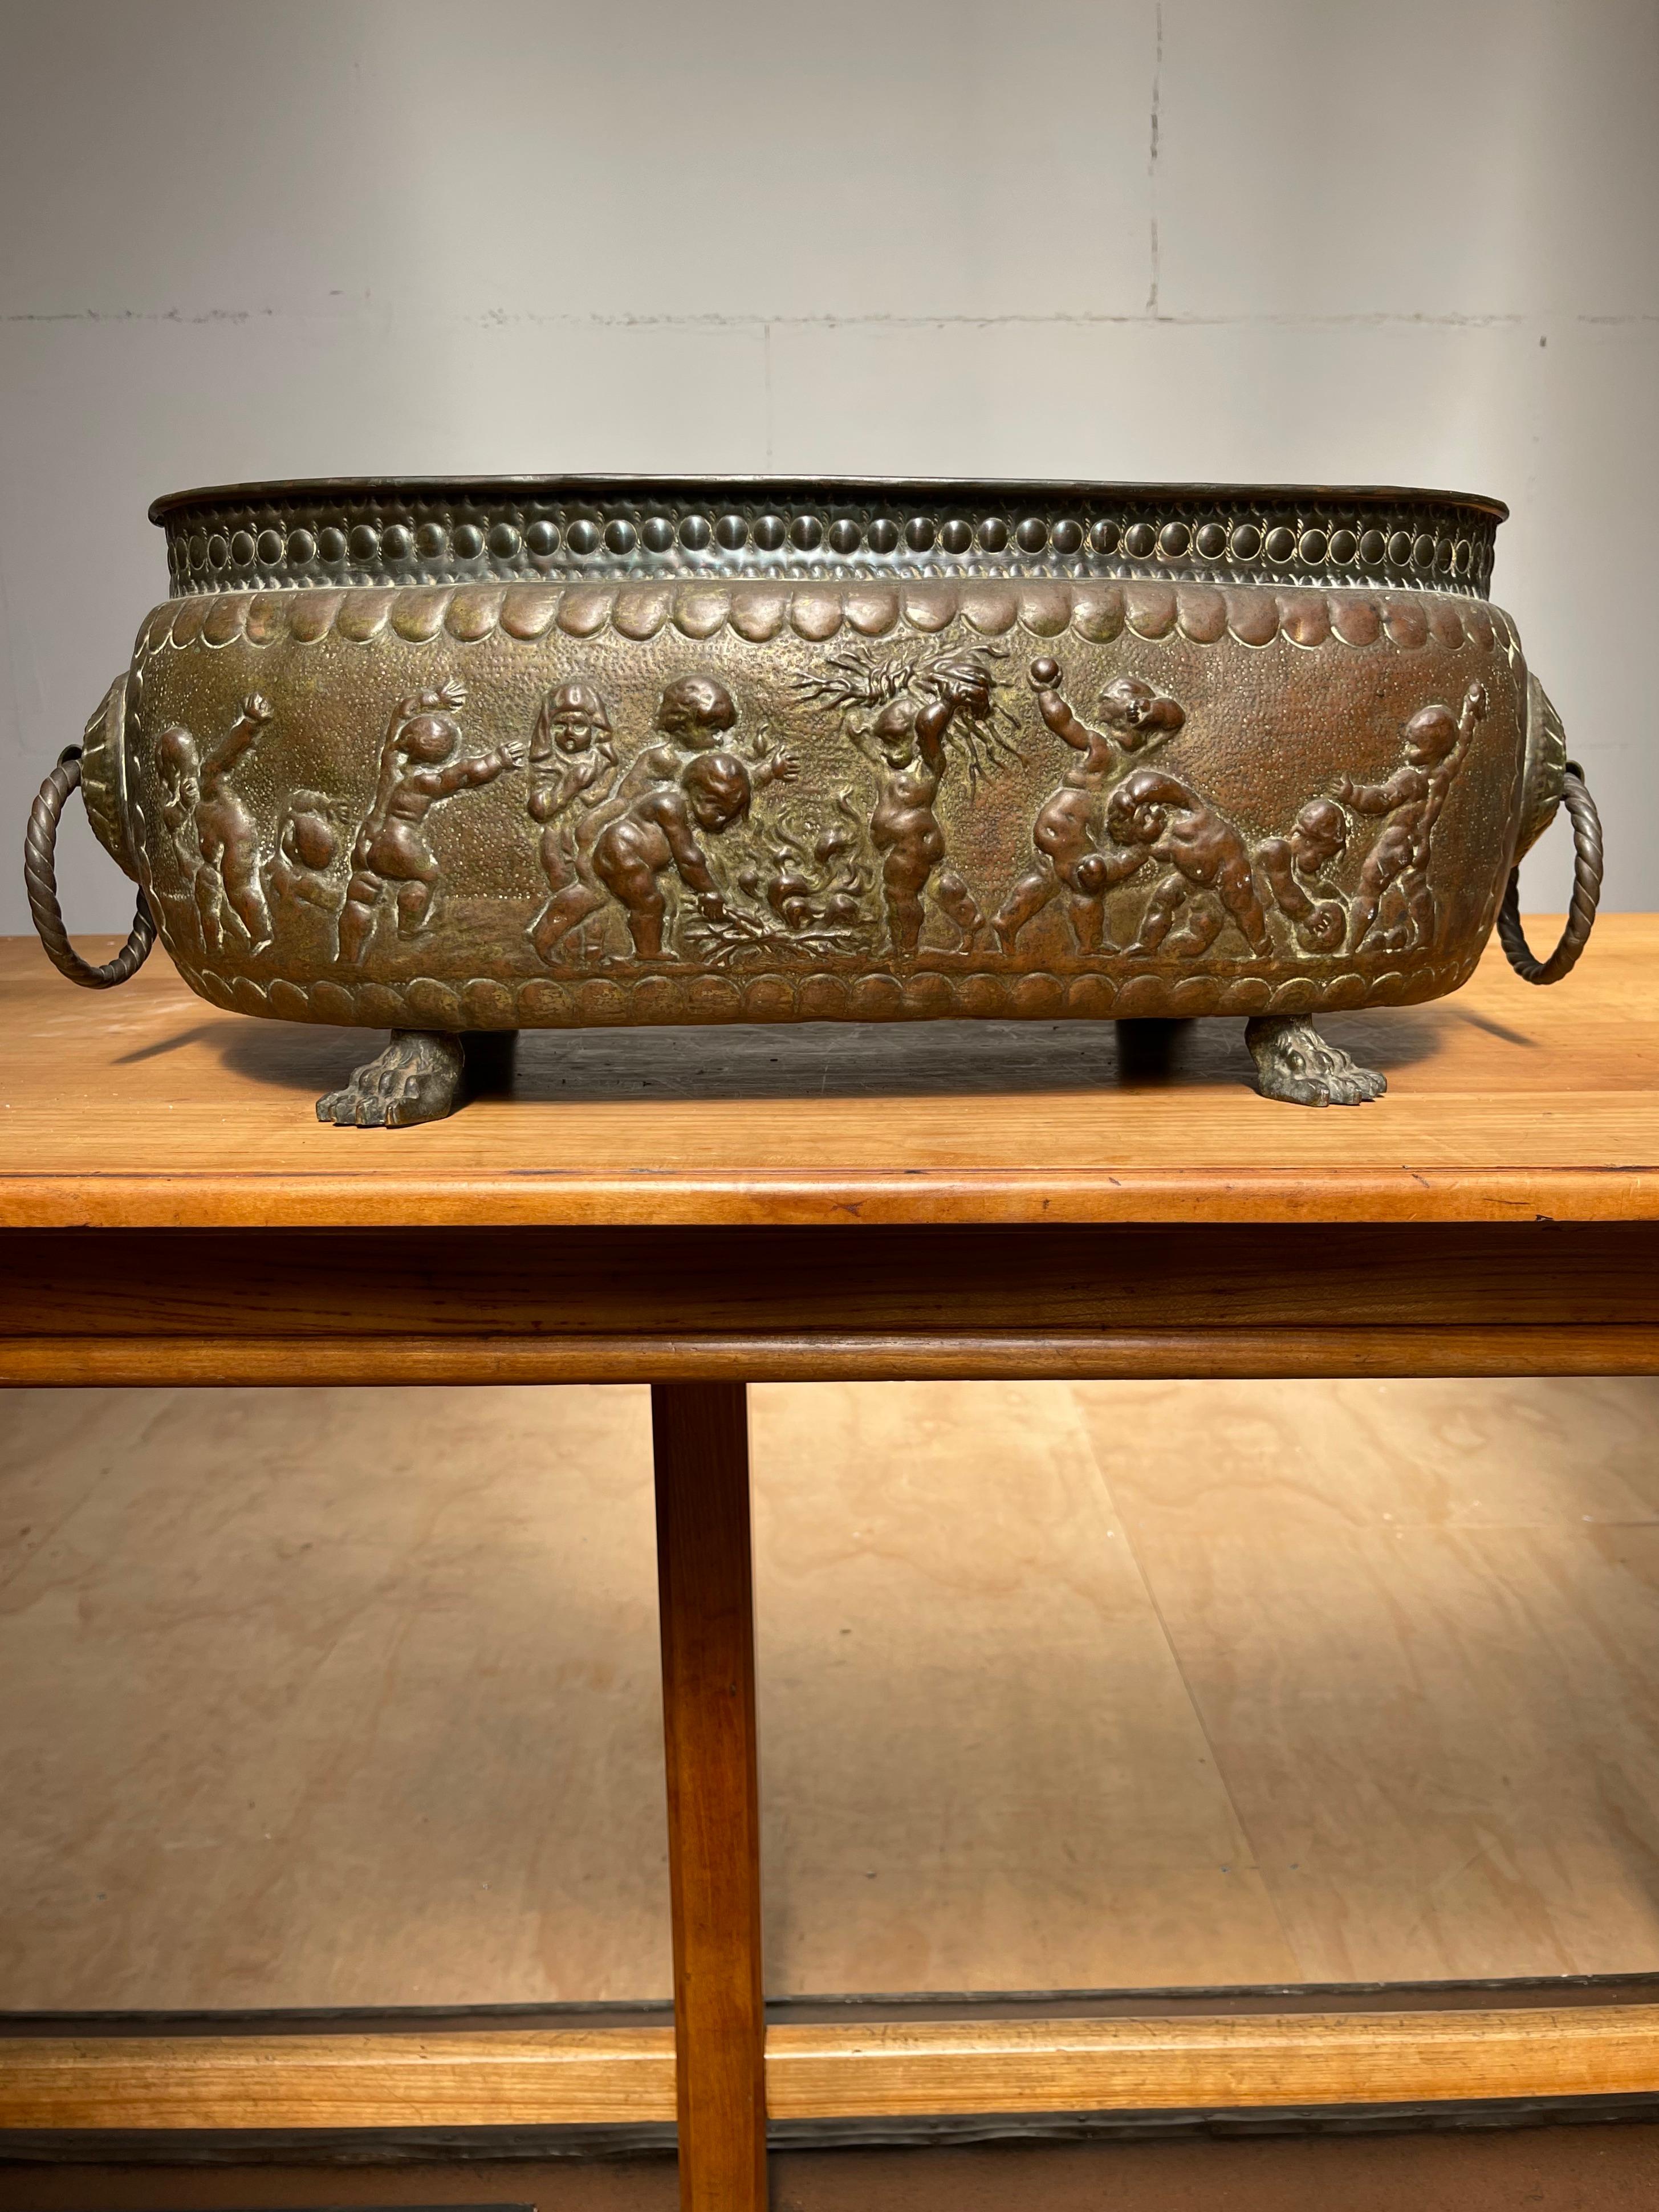 Hand-crafted and highly decorative, Renaissance Revival copper planter.

If you collect decorative antiques with angels and putti in particular then this hand-crafted home accessory form the late 1800s could be the perfect addition to your